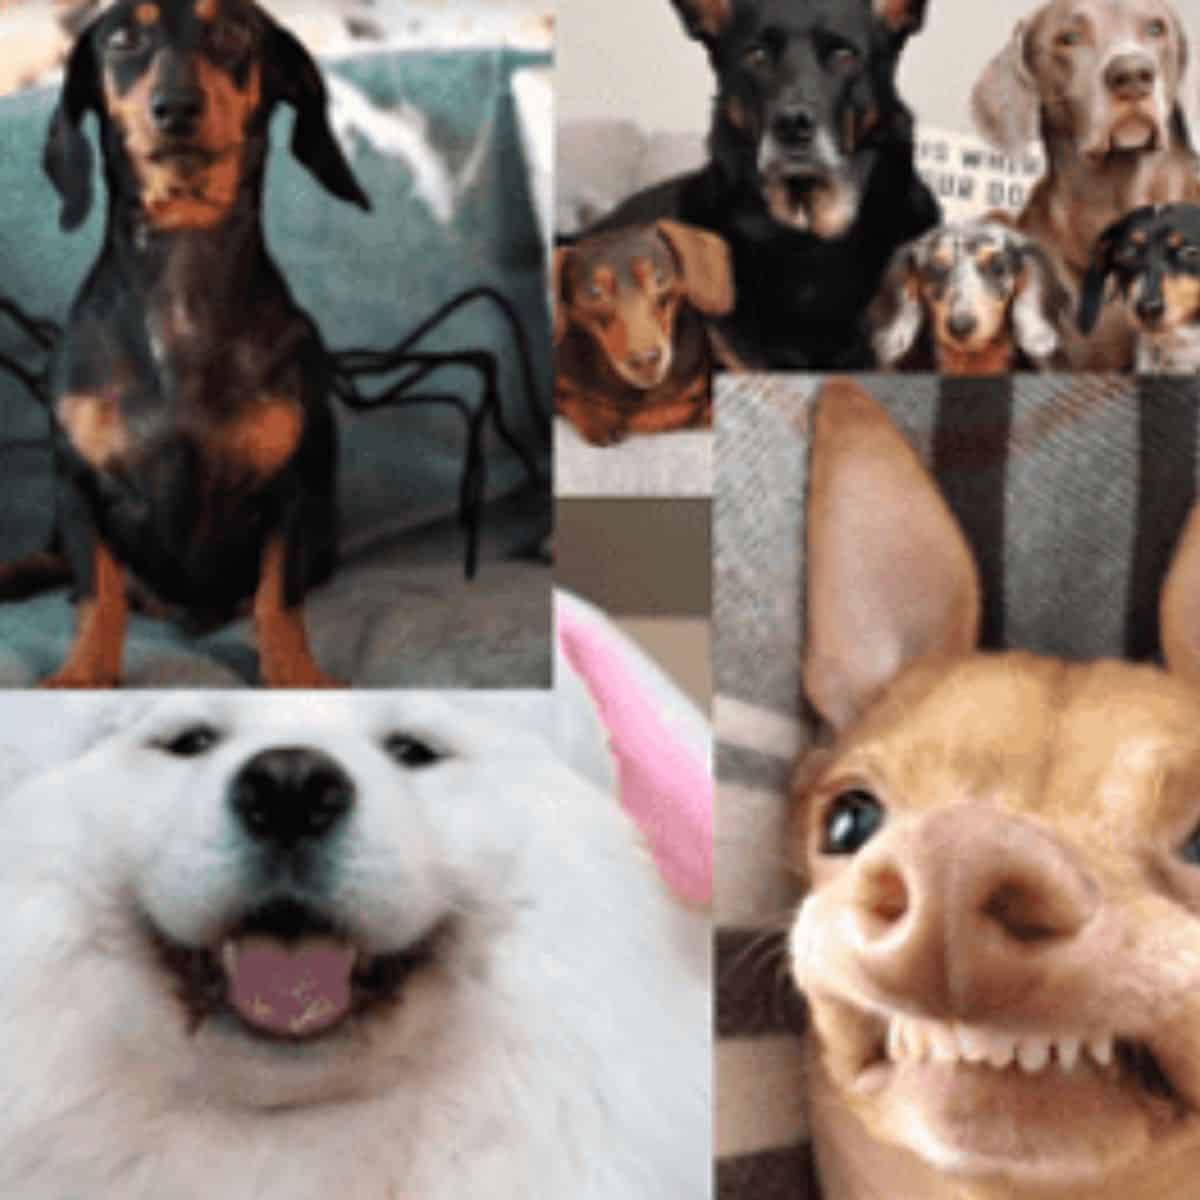 Dogs on social media grouped into 4 quadrants, a dachshund, a group of four popular dogs a white Samoyed and a chihuahua with an overbite.